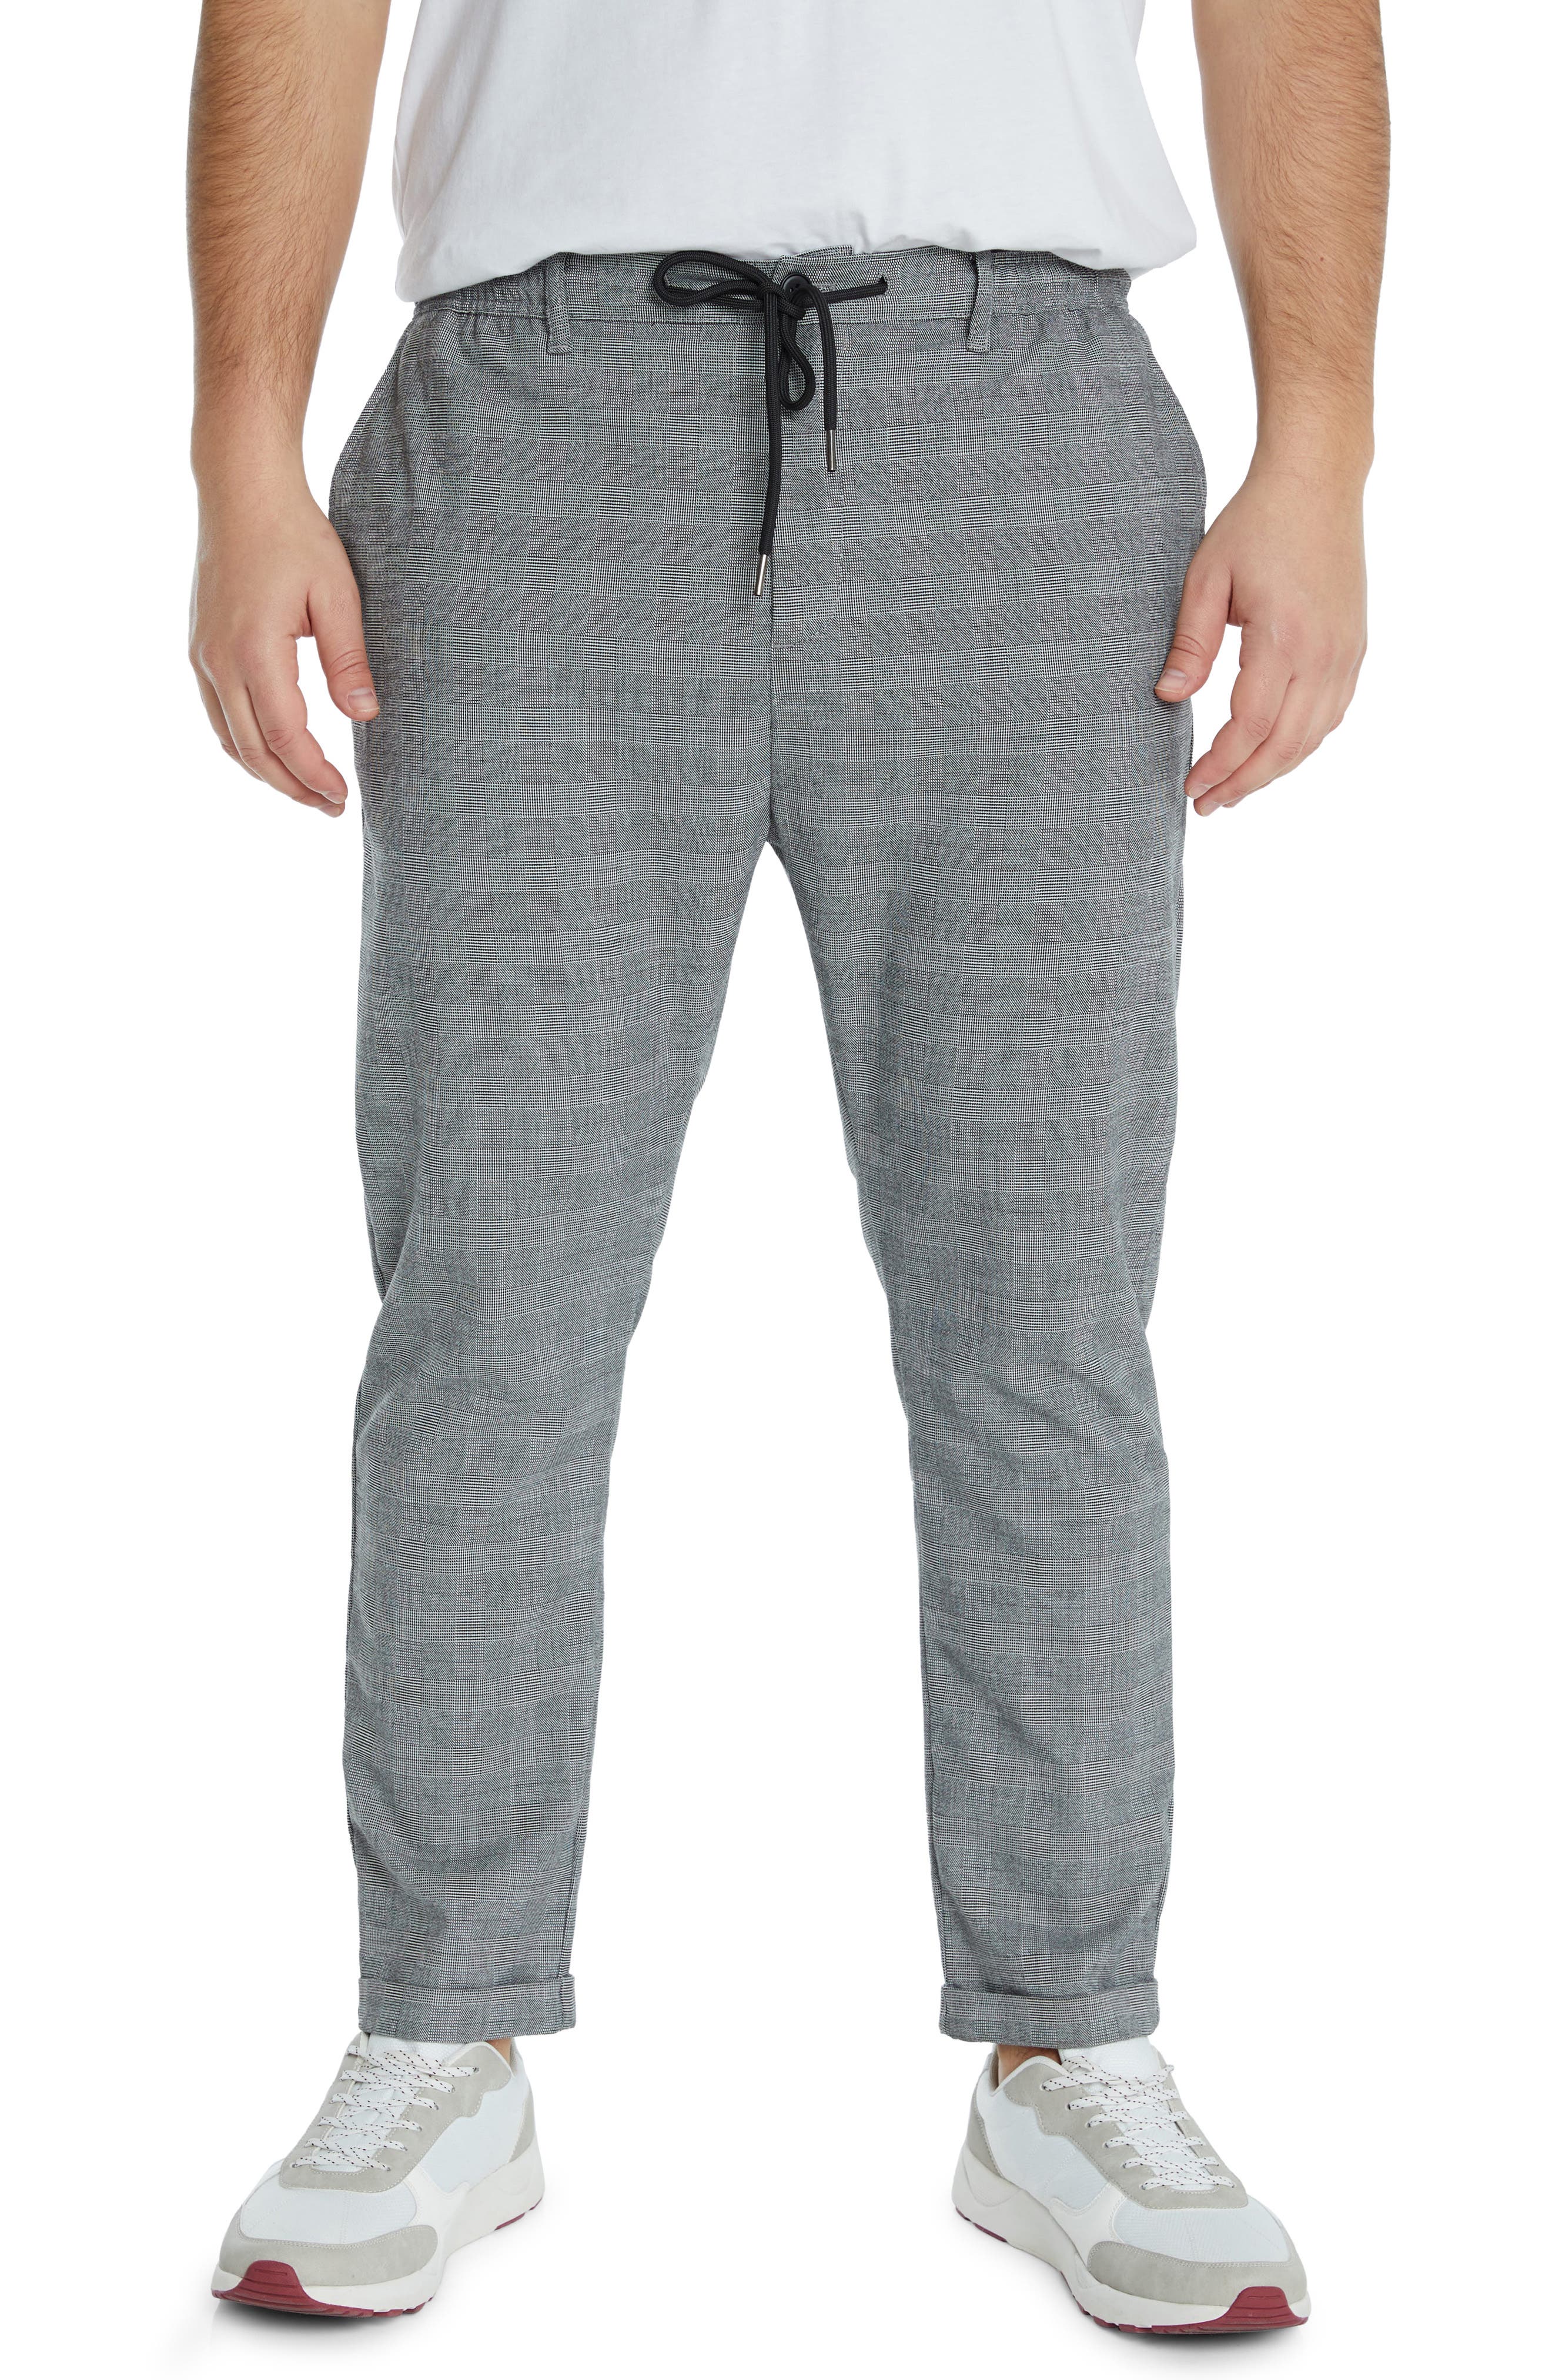 Johnny Bigg Carter Check Stretch Pants in Grey at Nordstrom